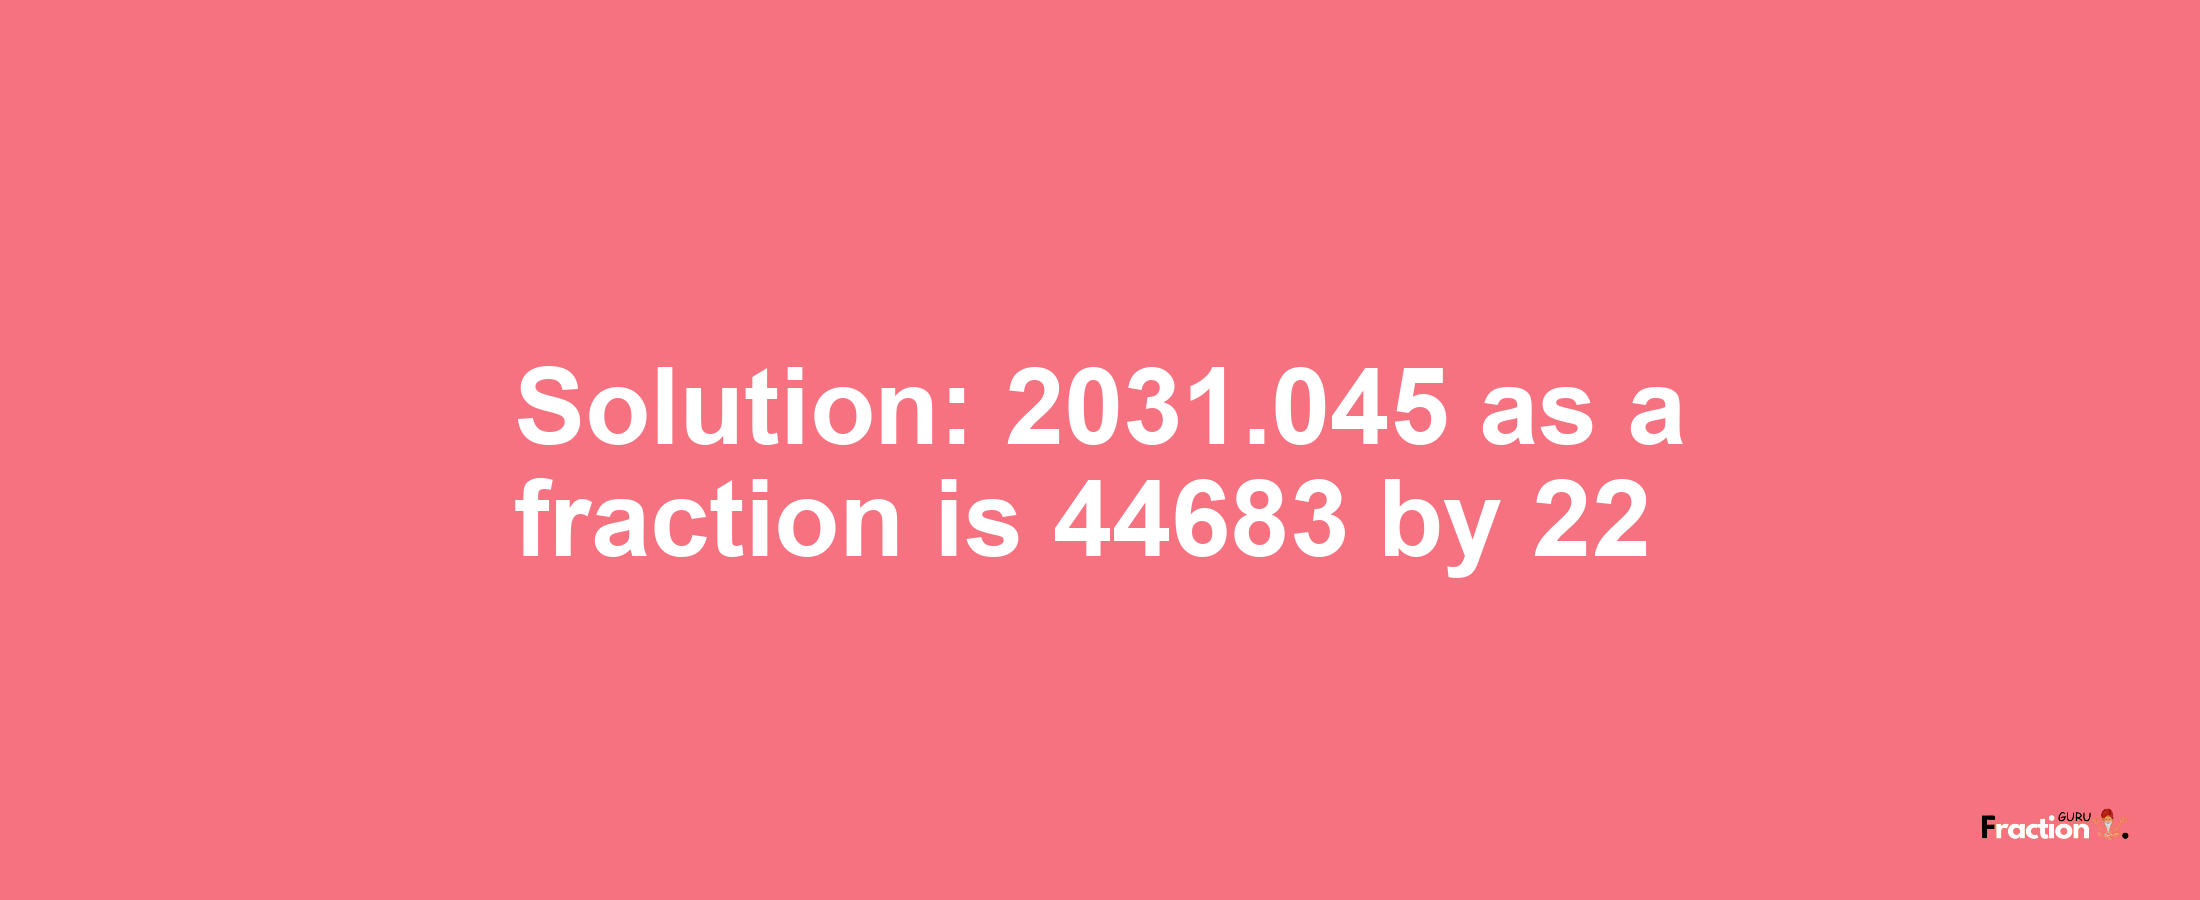 Solution:2031.045 as a fraction is 44683/22